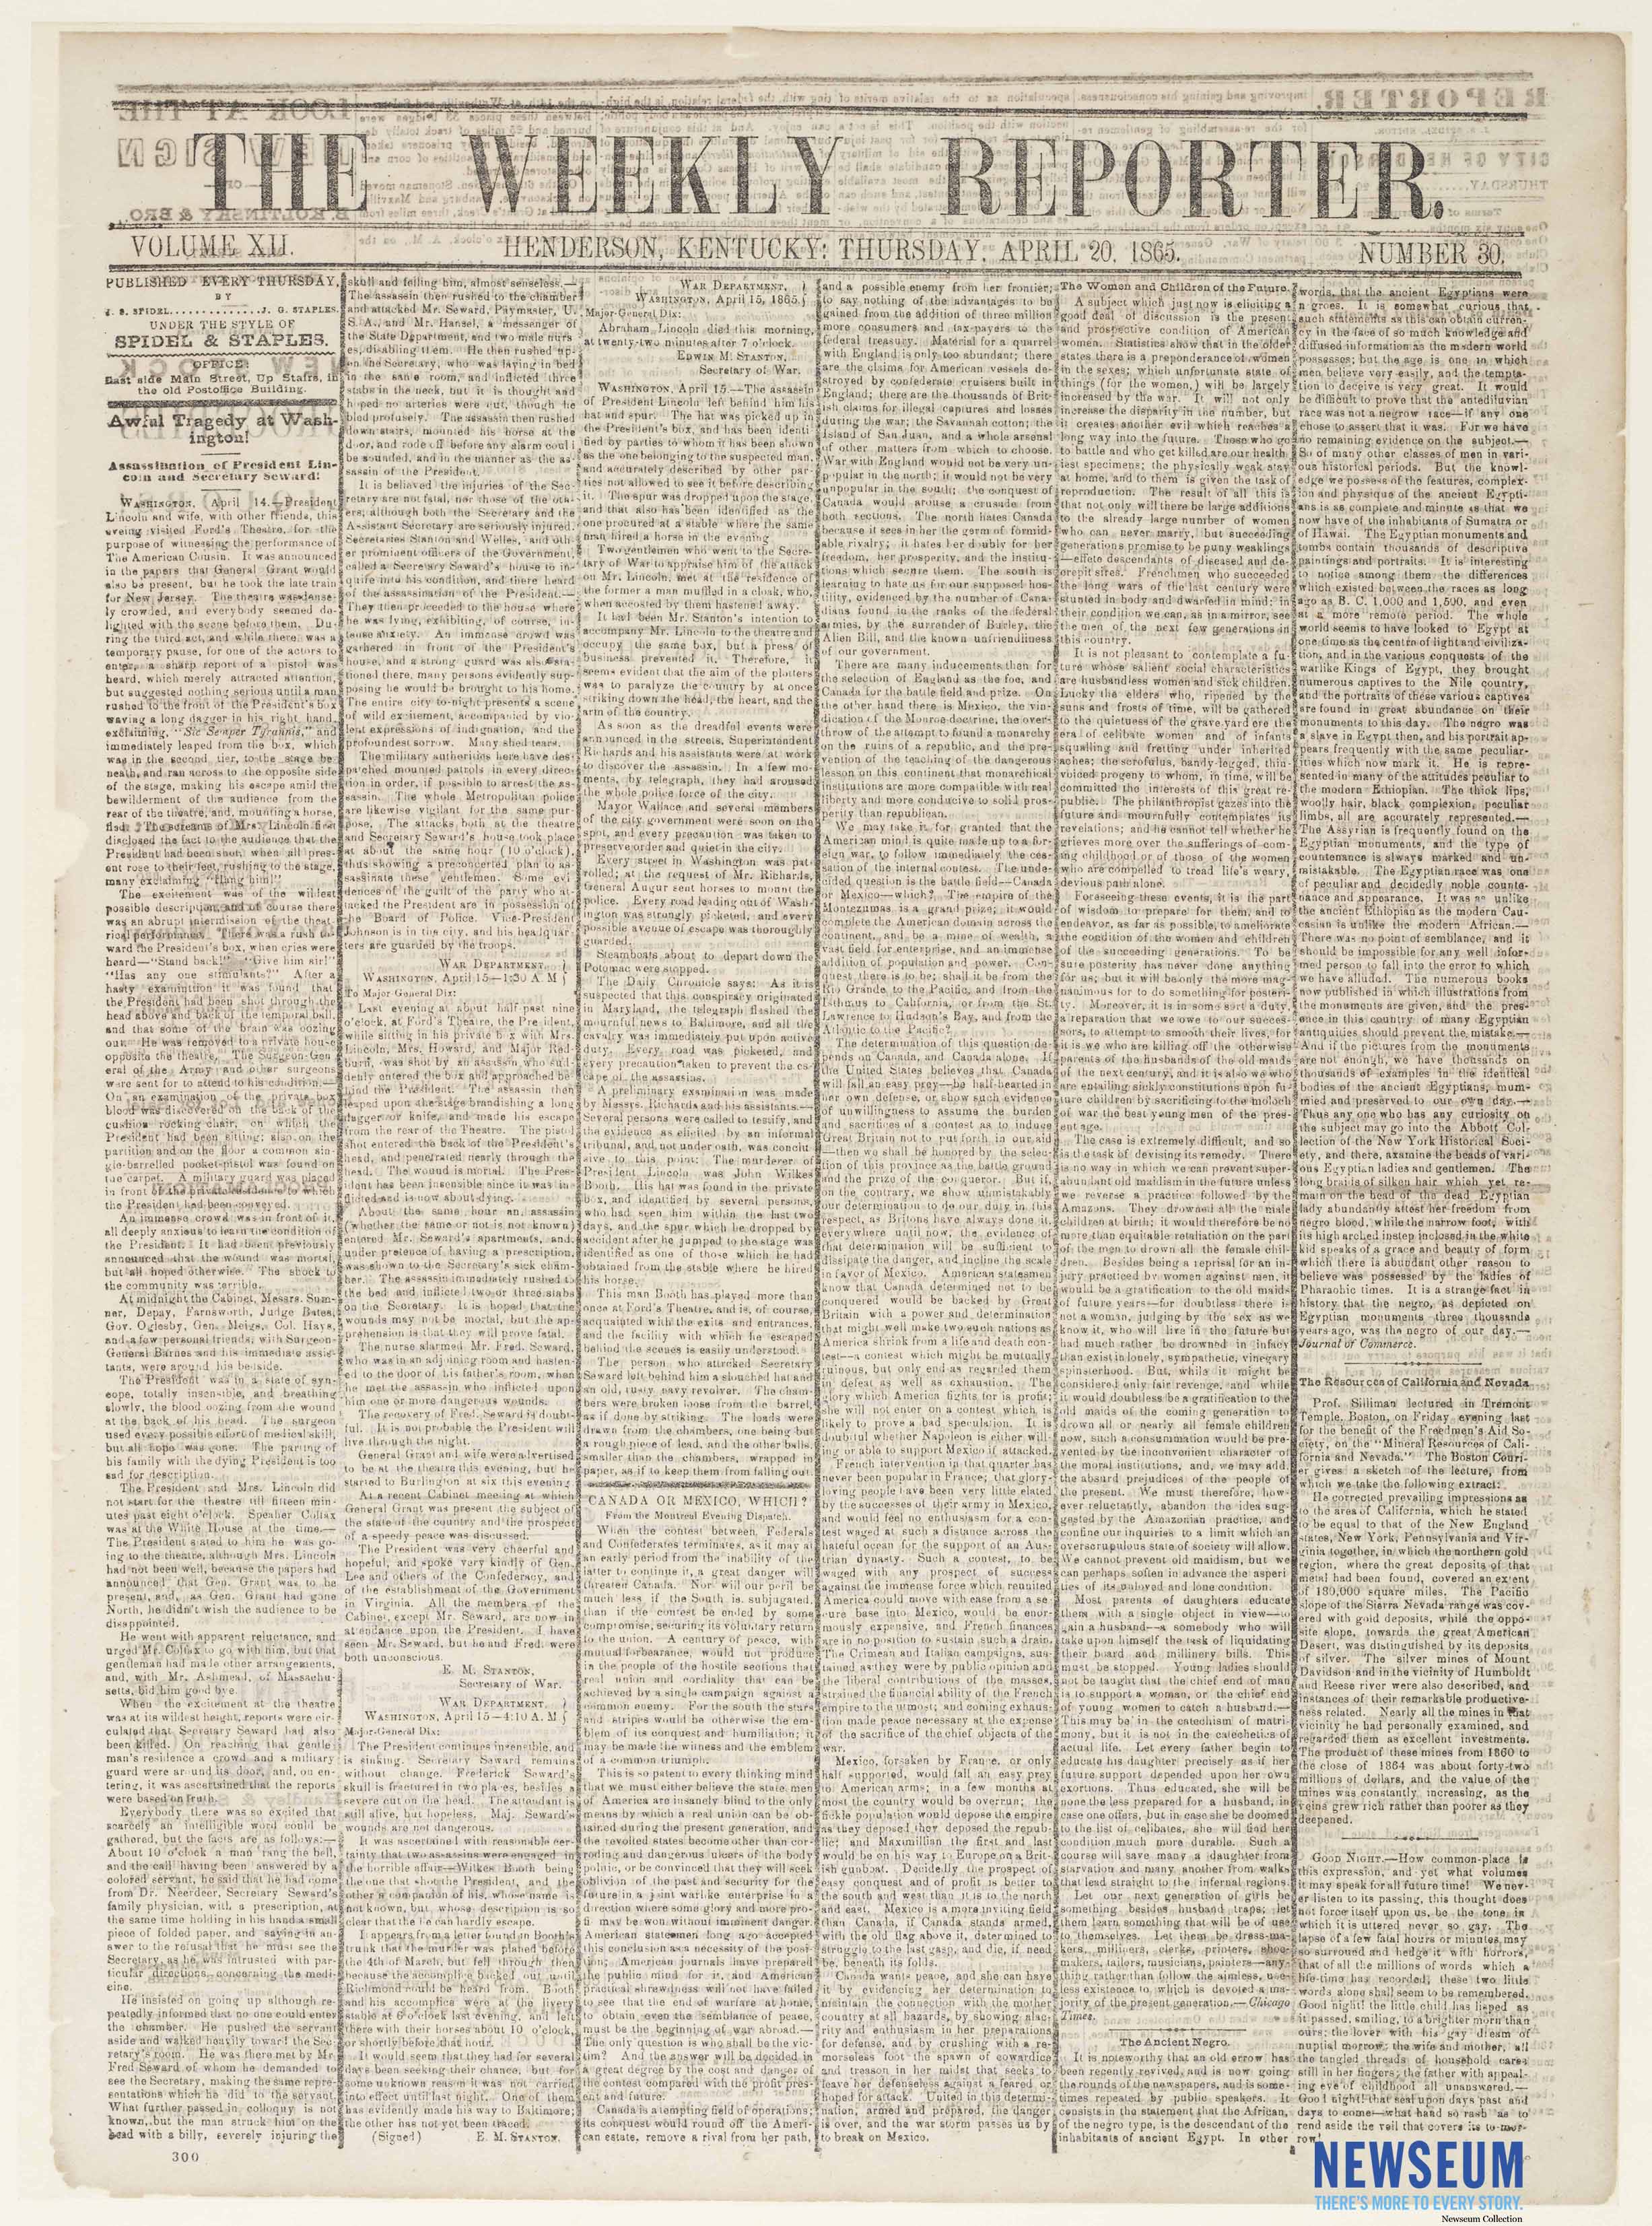 The Weekly Reporter, April 20, 1865